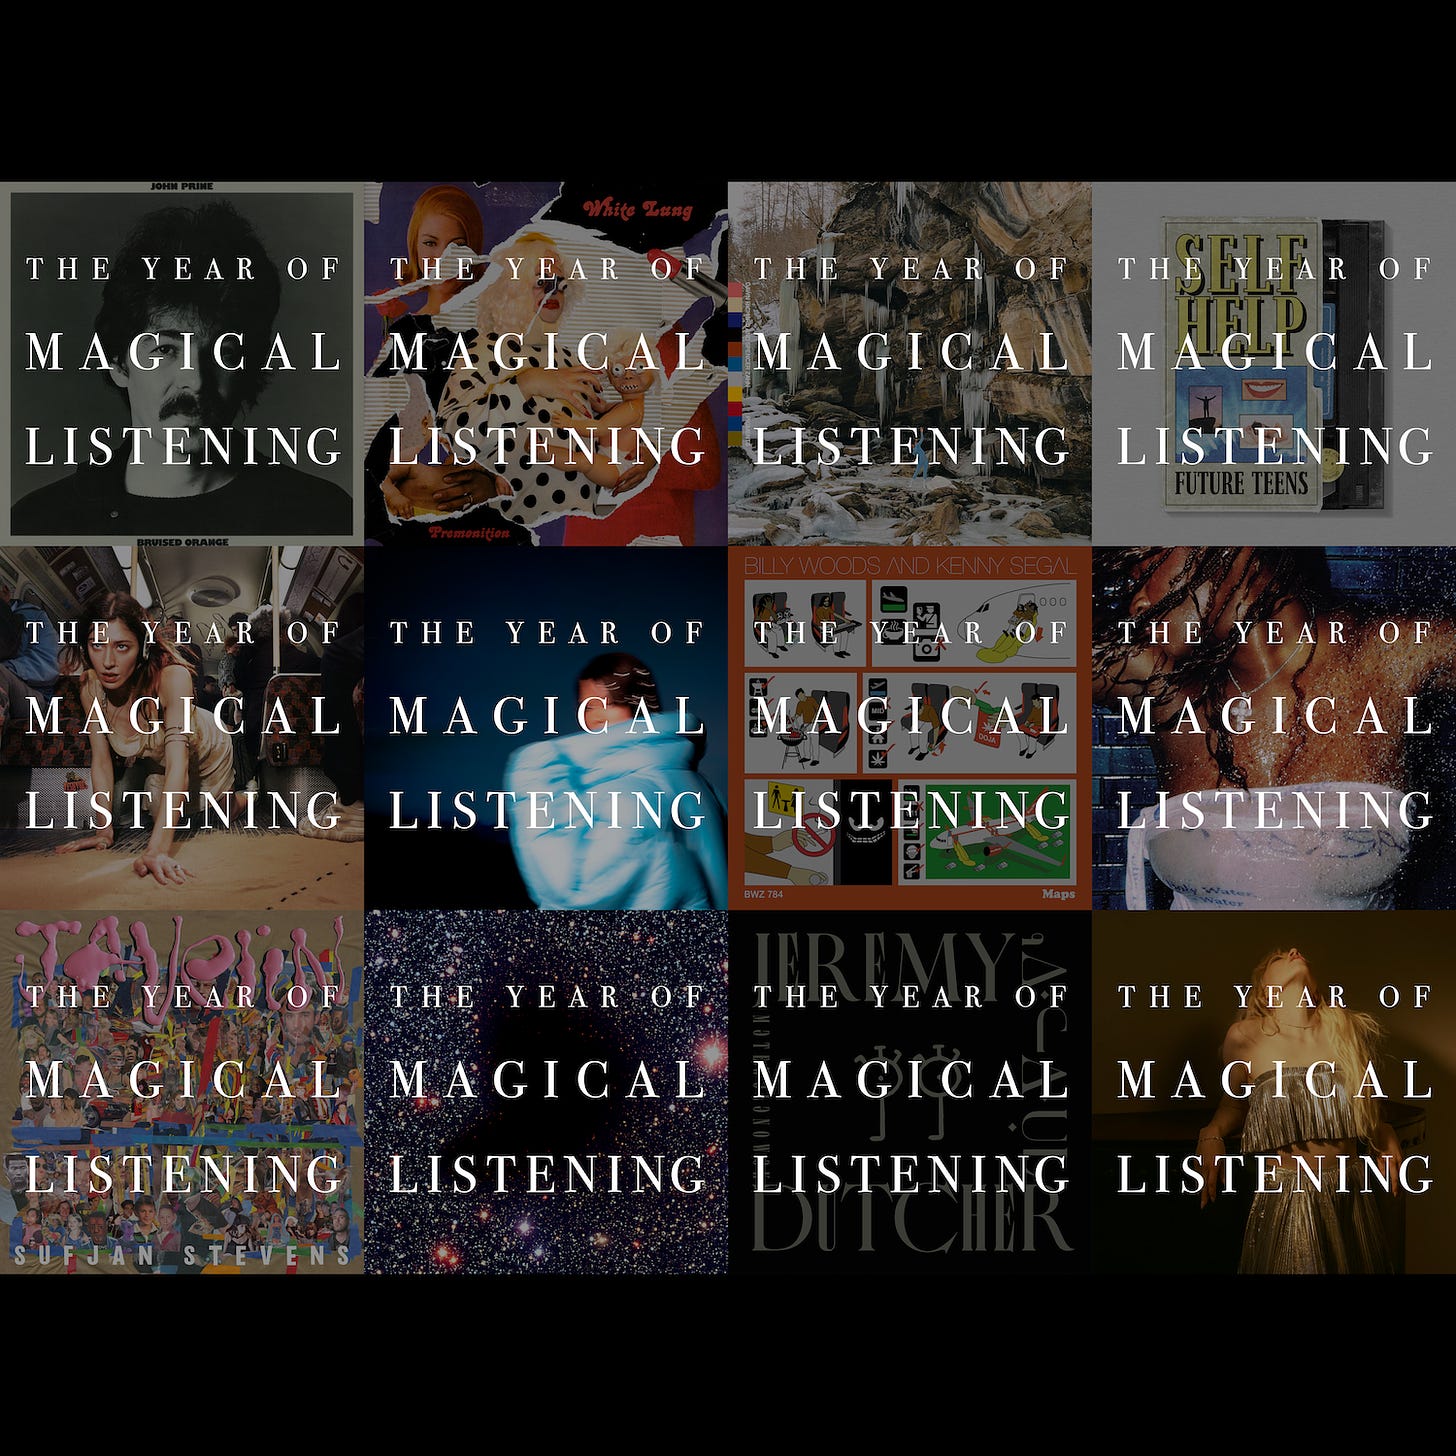 A collage of the 12 episode covers from season 4 of The Year of Magical Listening